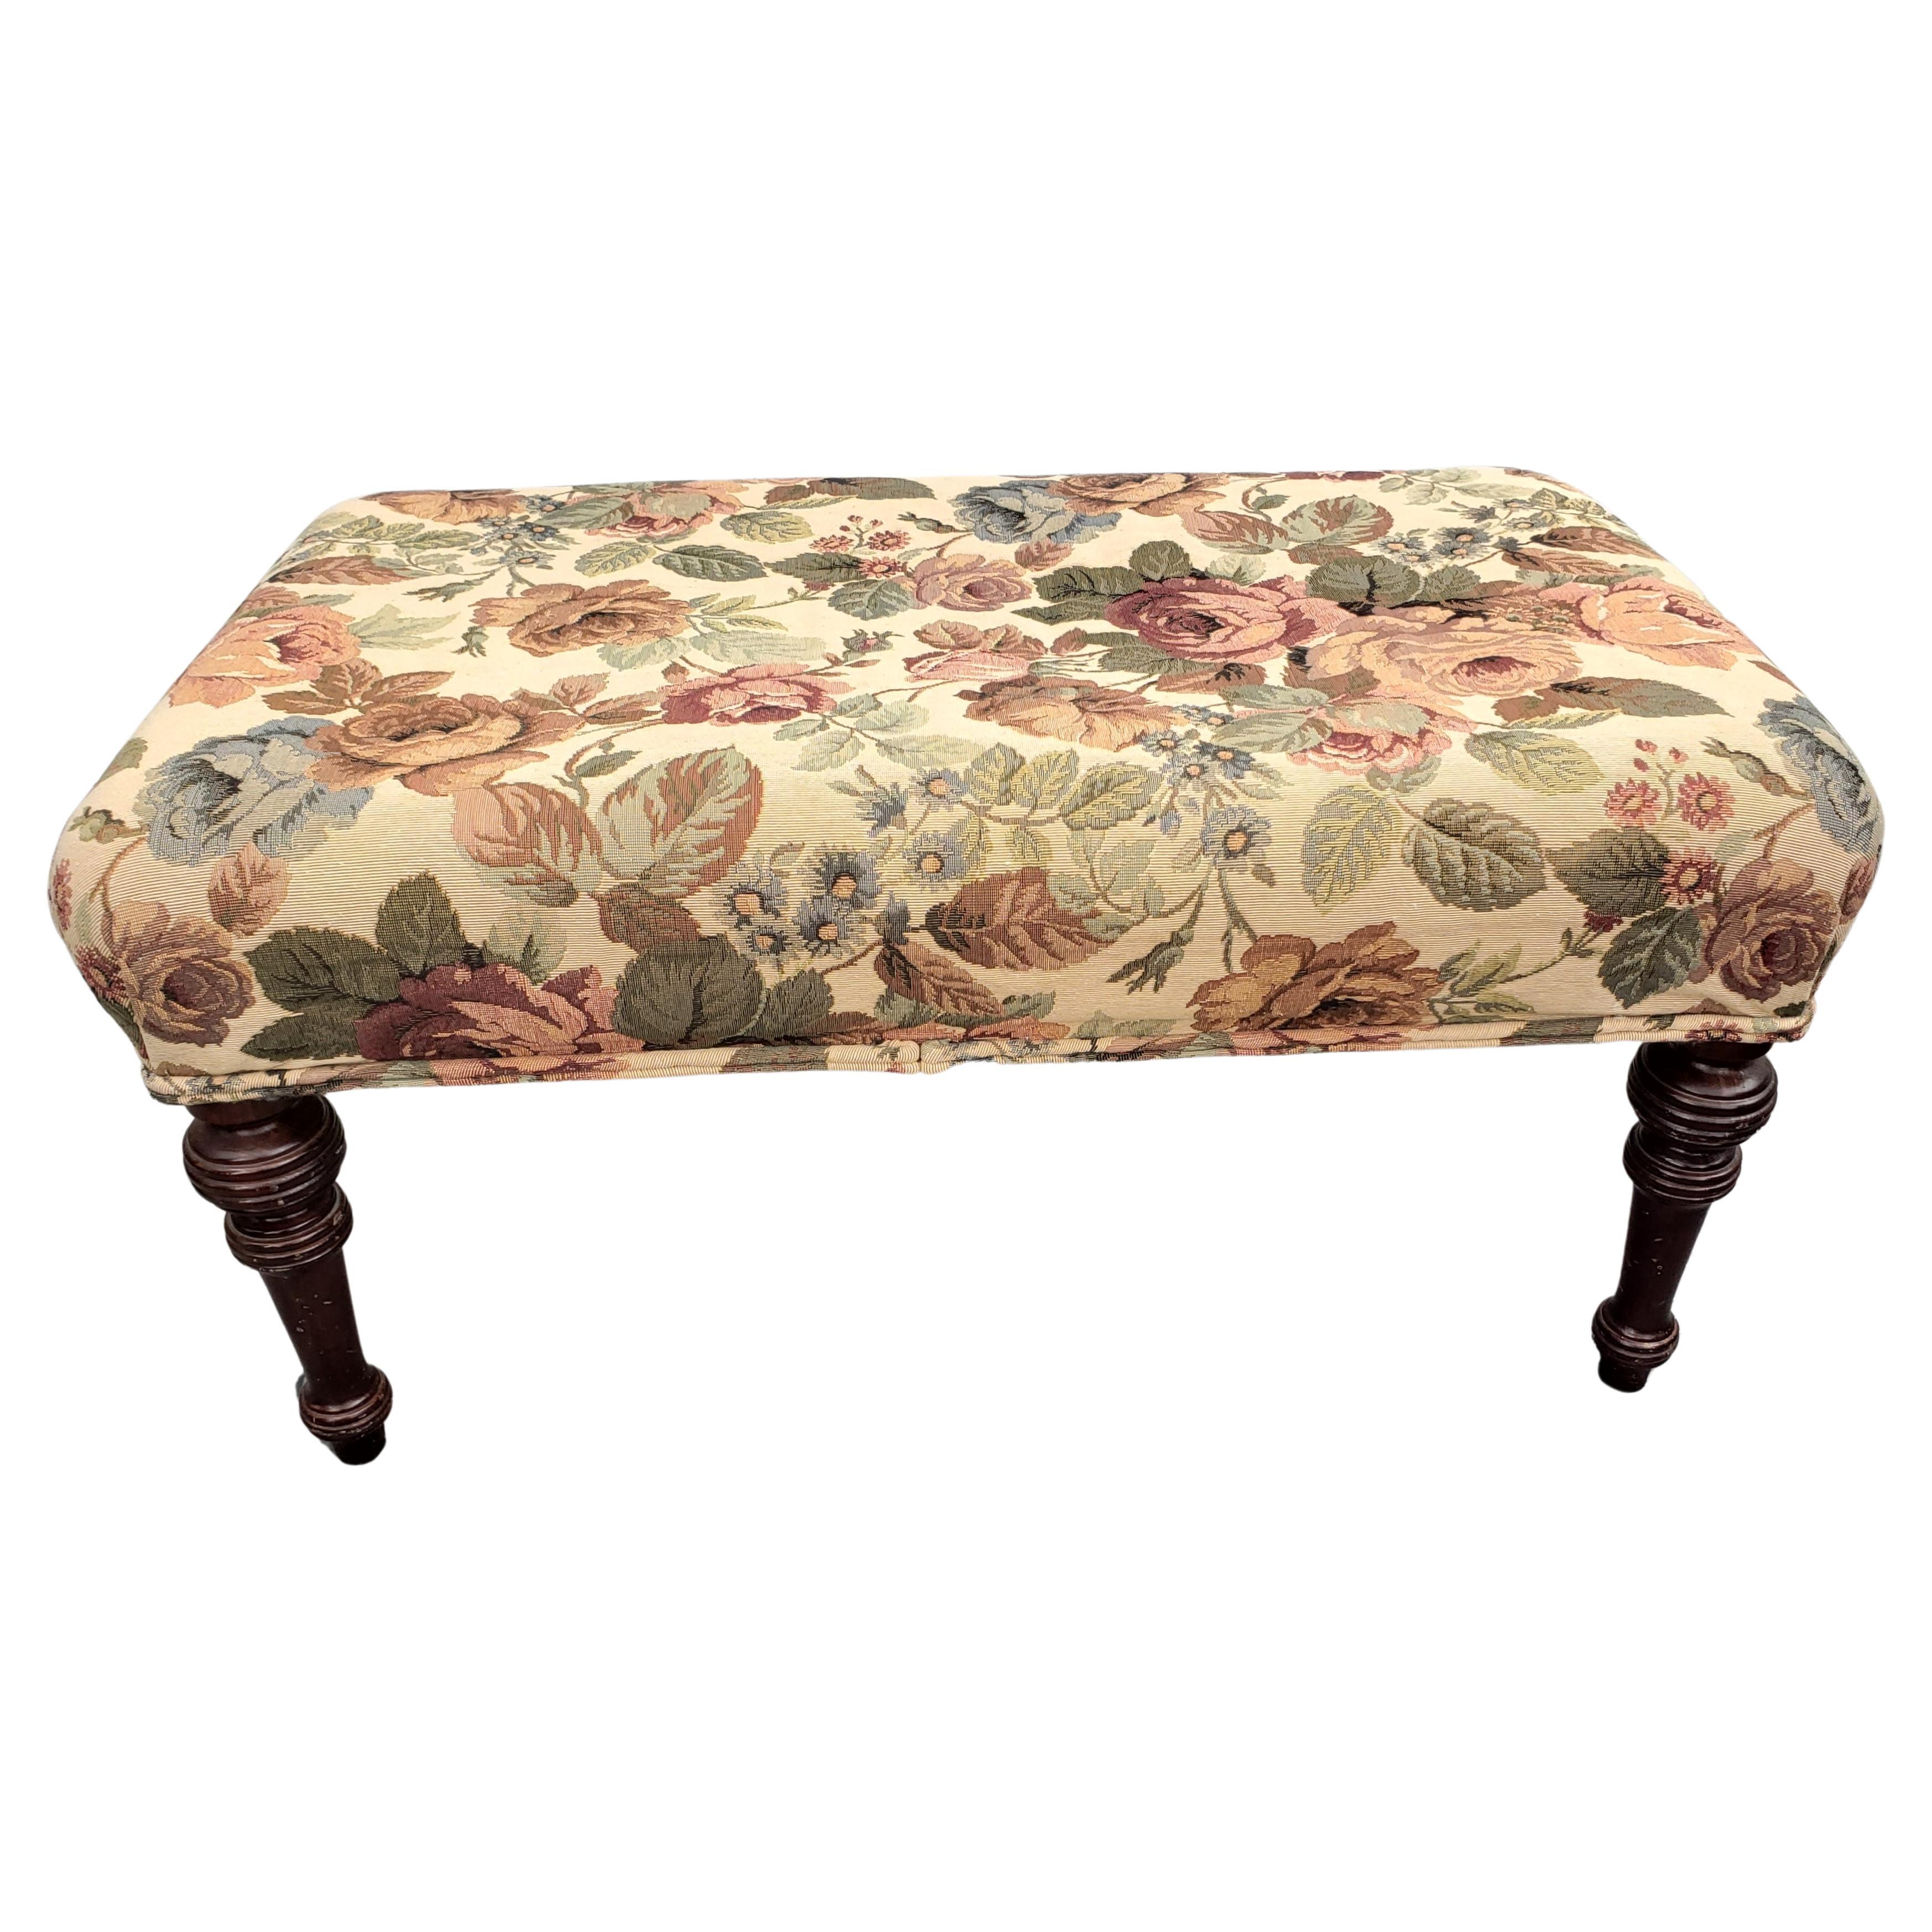 Vintage Mahogany and French Floral Tapestry Bench Ottoman Stool